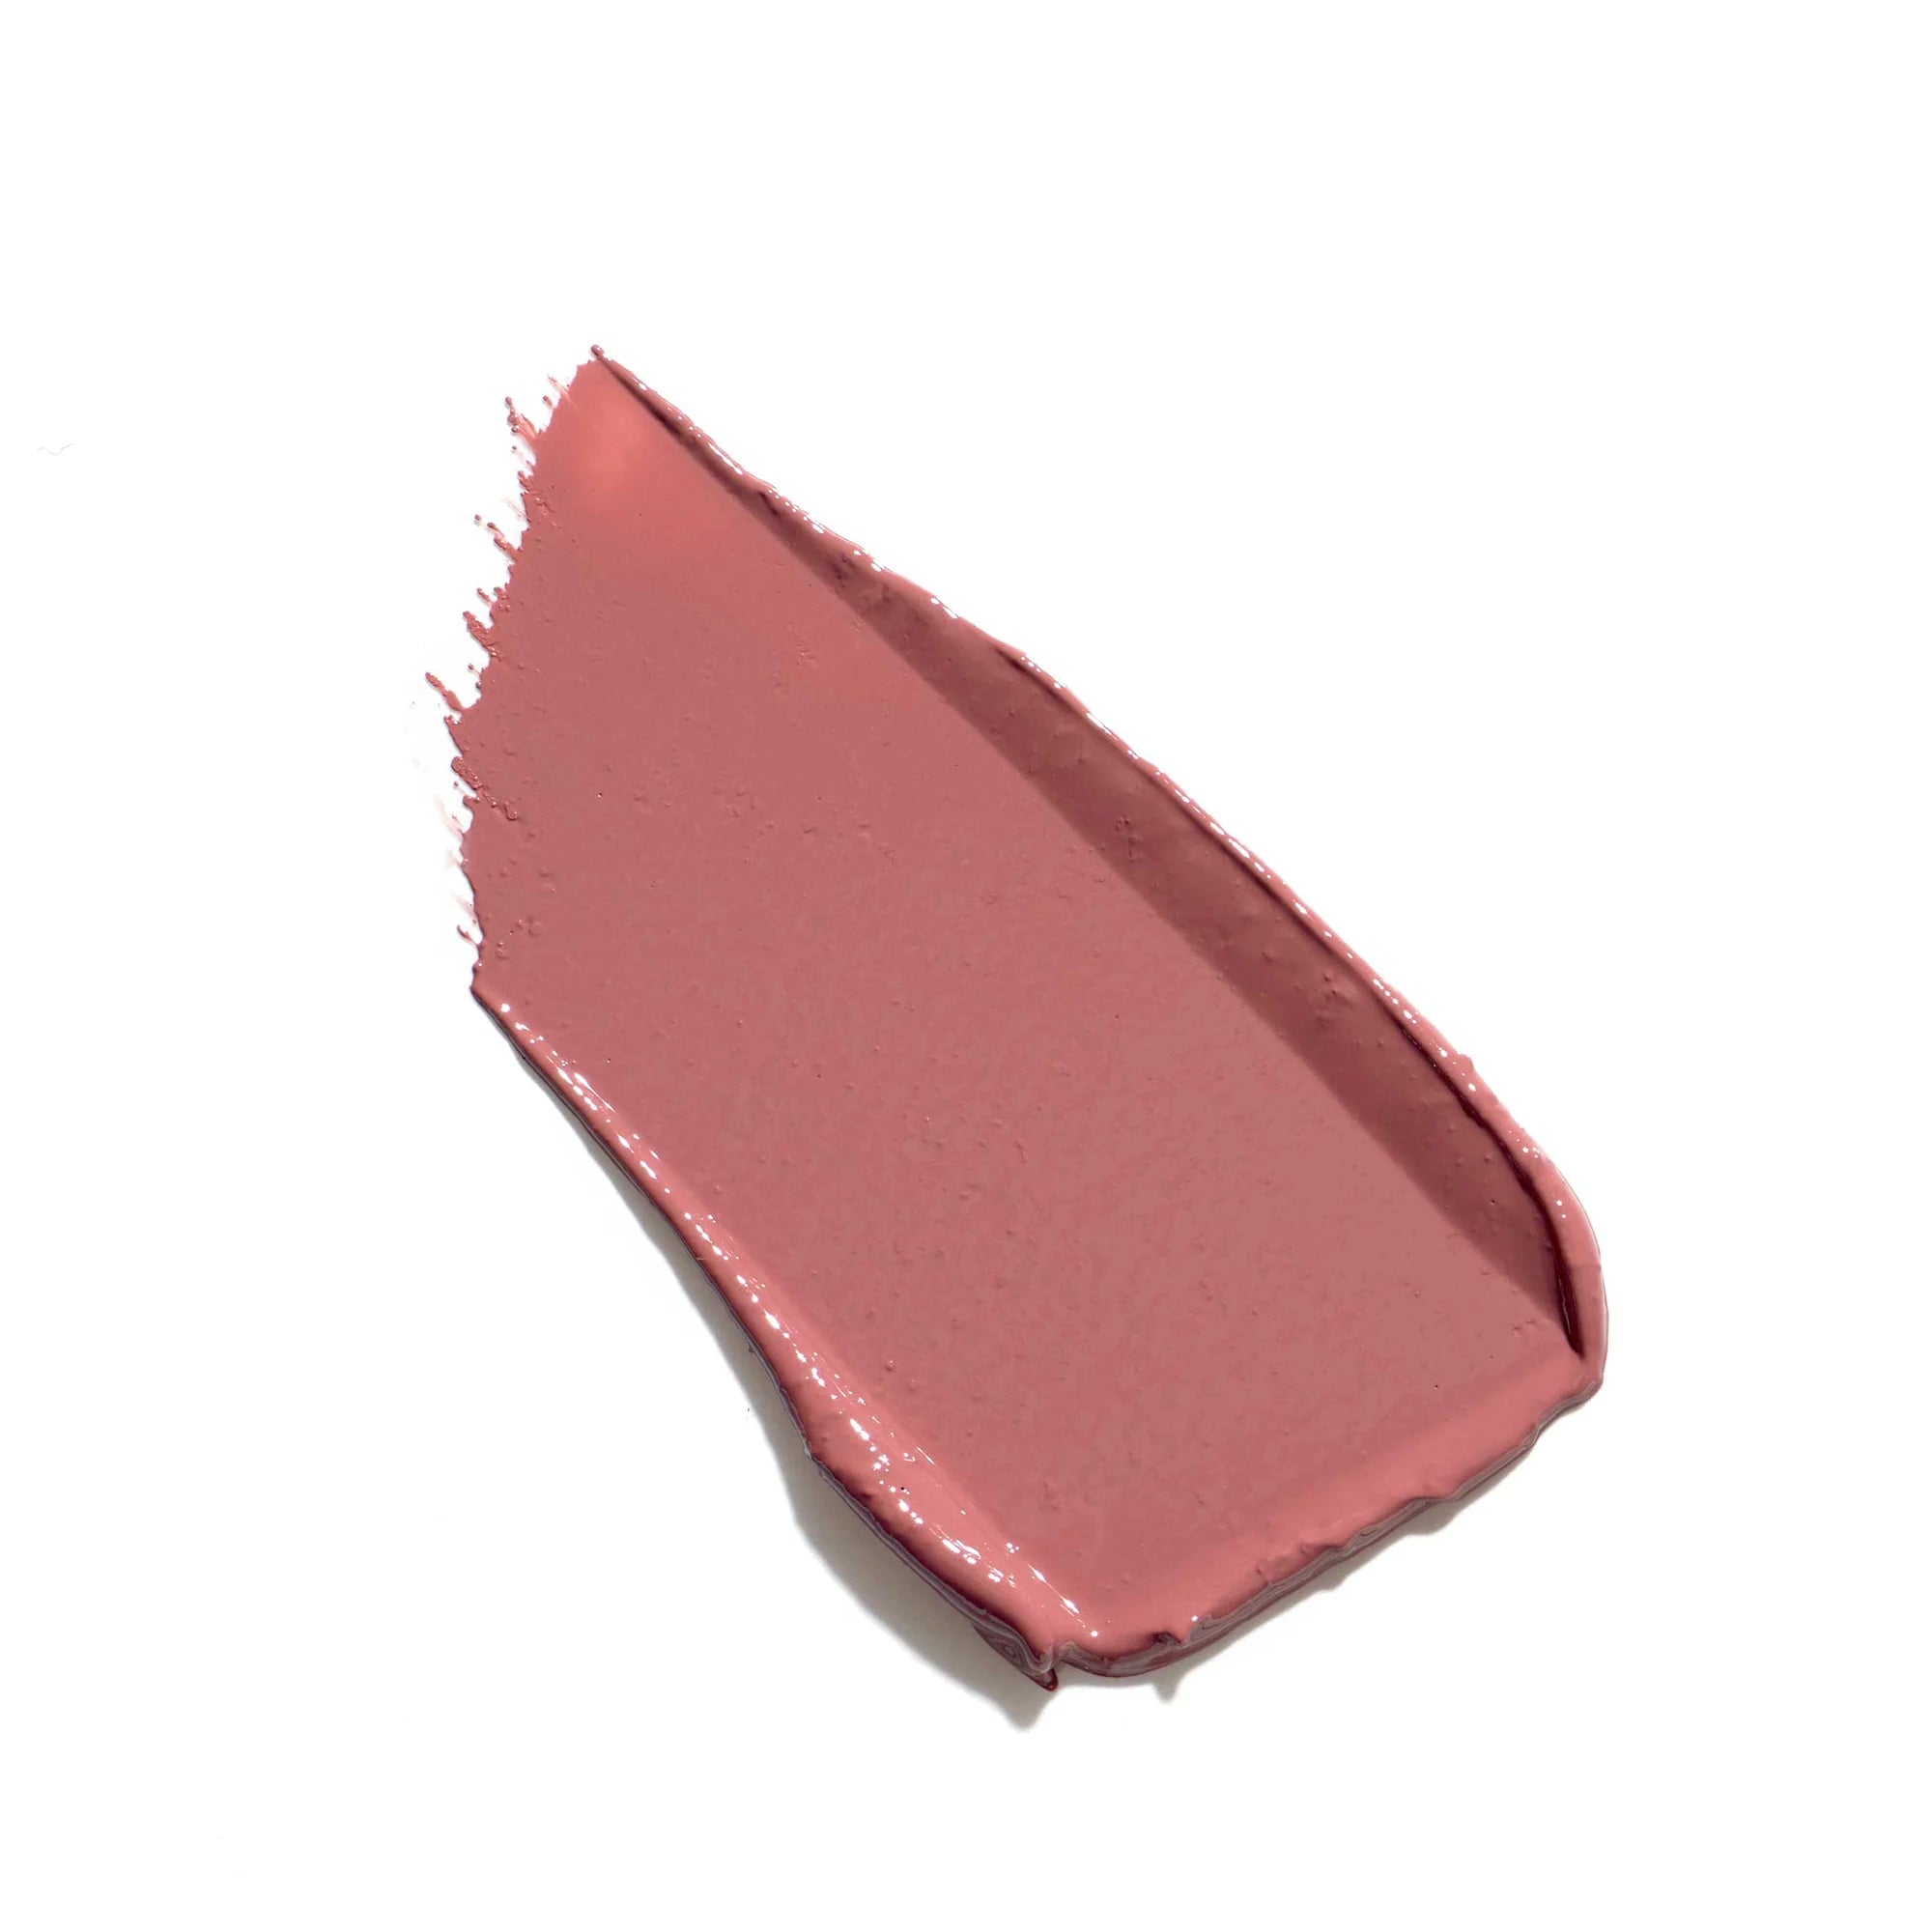 Jane Iredale's ColorLuxe Hydrating Cream Lipstick - swatch and color Magnolia - cool medium mauve